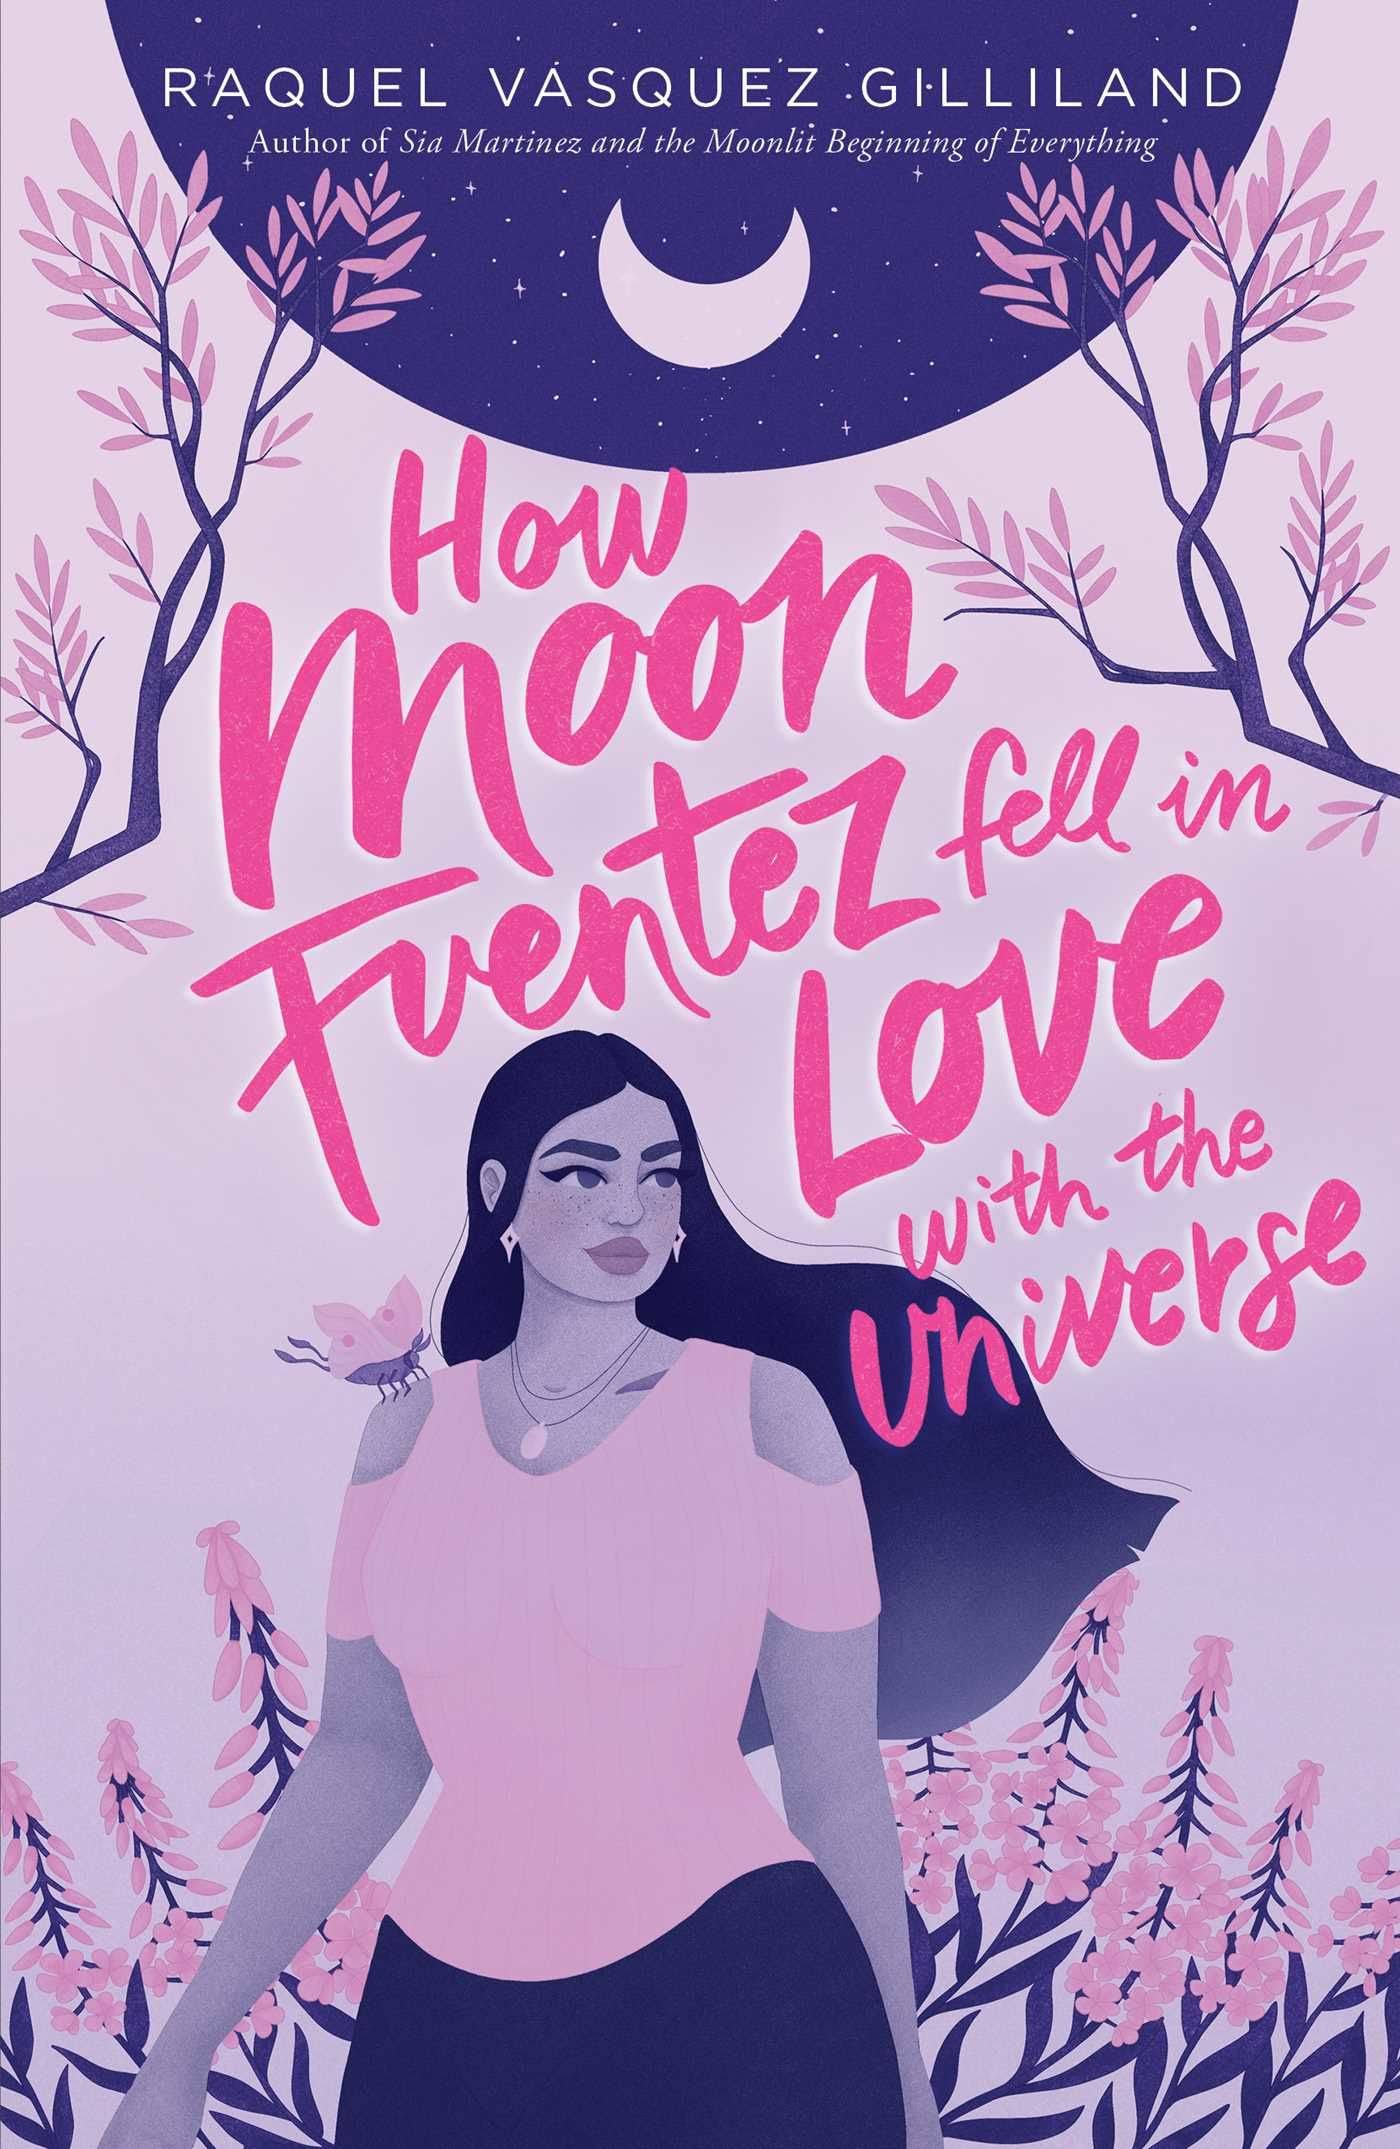 How Moon Fuentez Fell in Love with The Universe